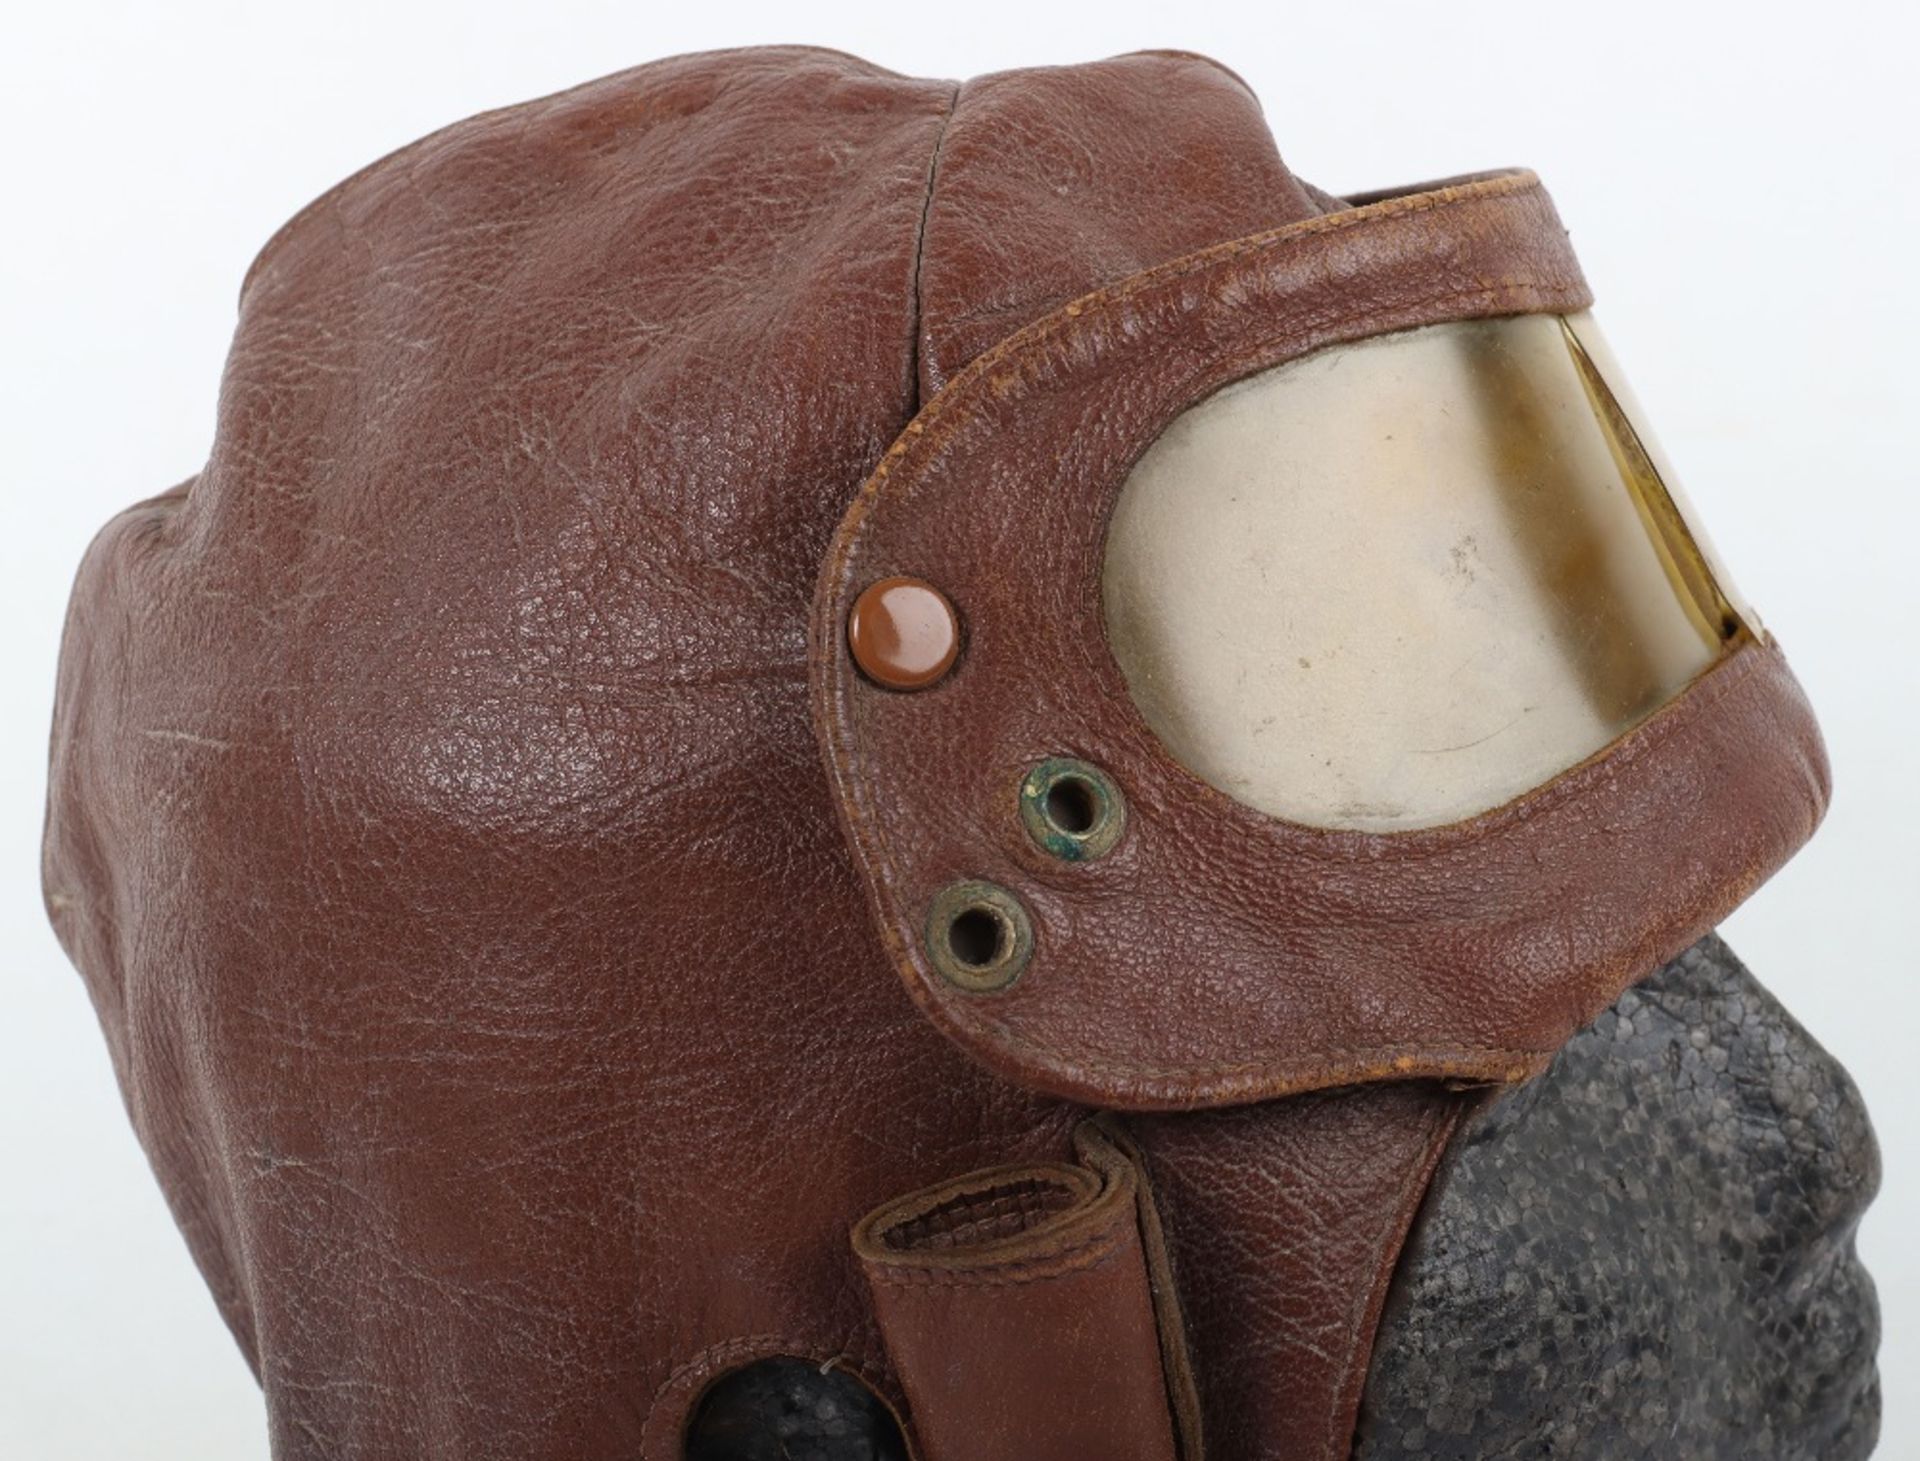 One Piece Leather Flying Helmet & Goggles Combination - Image 6 of 10